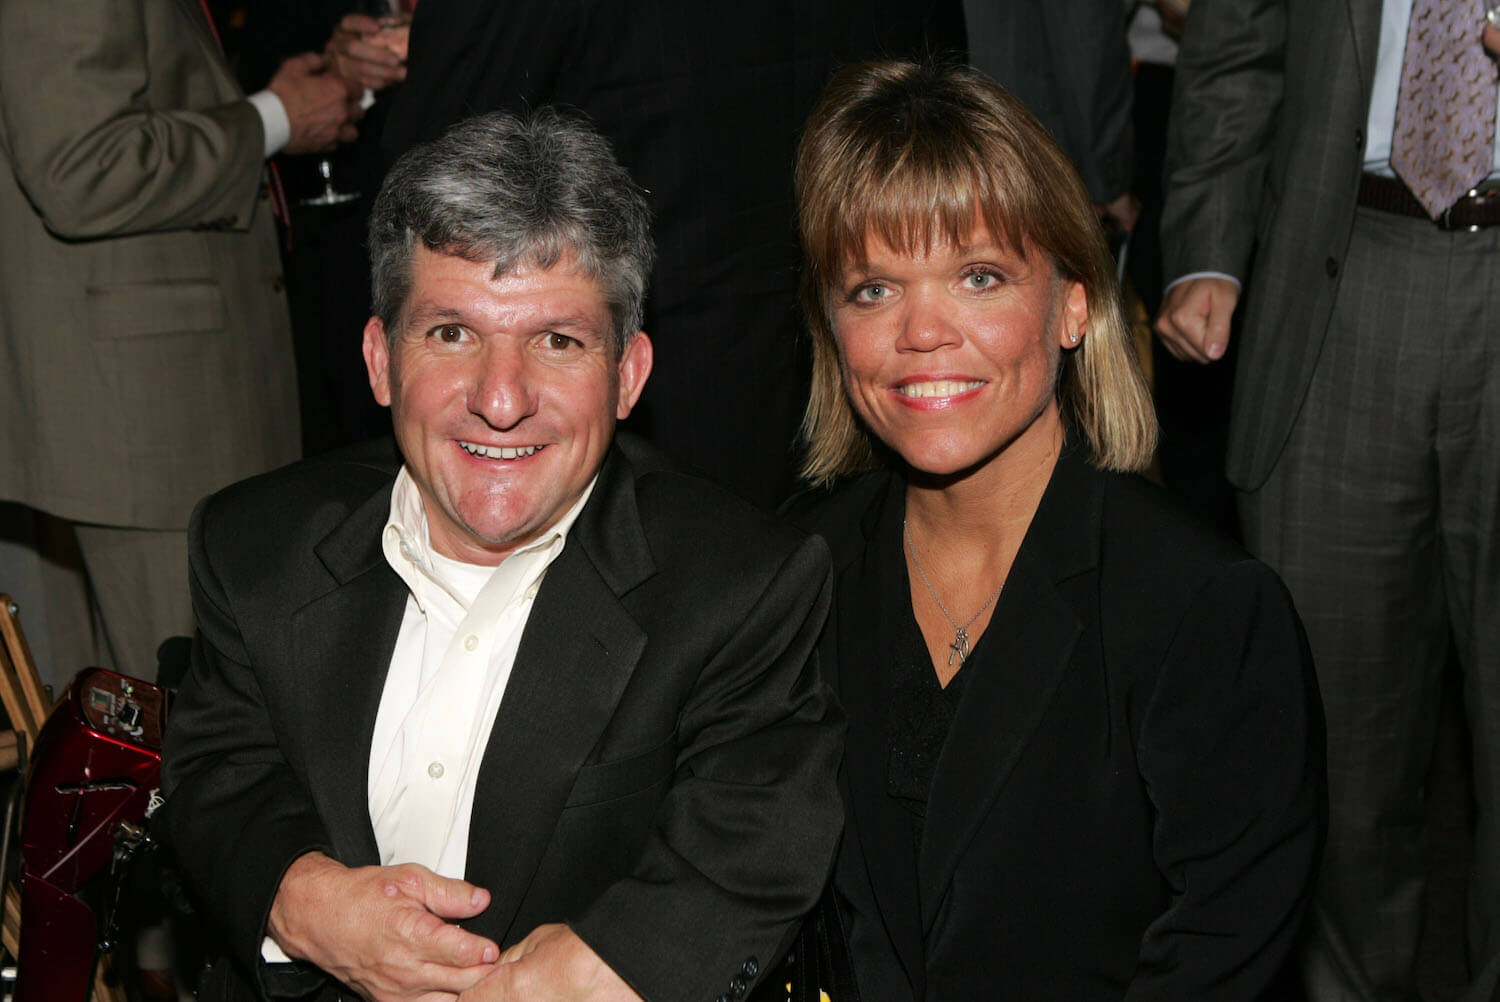 Matt and Amy Roloff from 'Little People, Big World' sitting next to each other and smiling against a black background